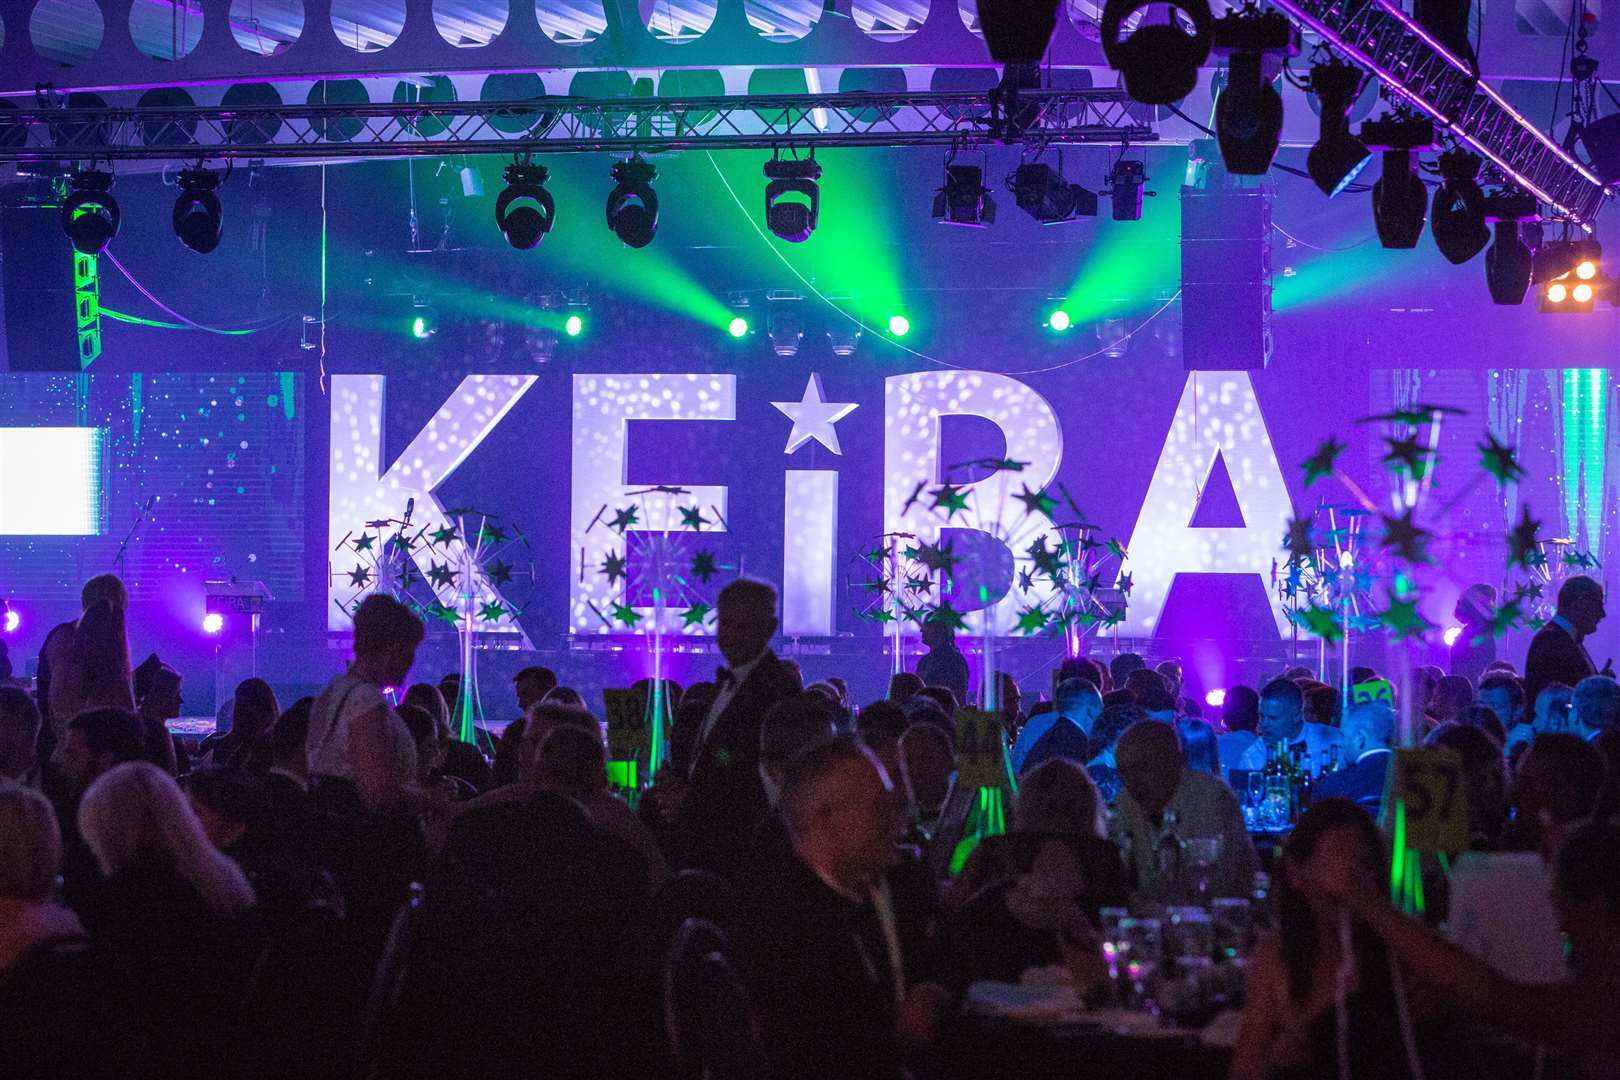 Winning a KEiBA can boost staff morale and deliver a boost to your bottom line